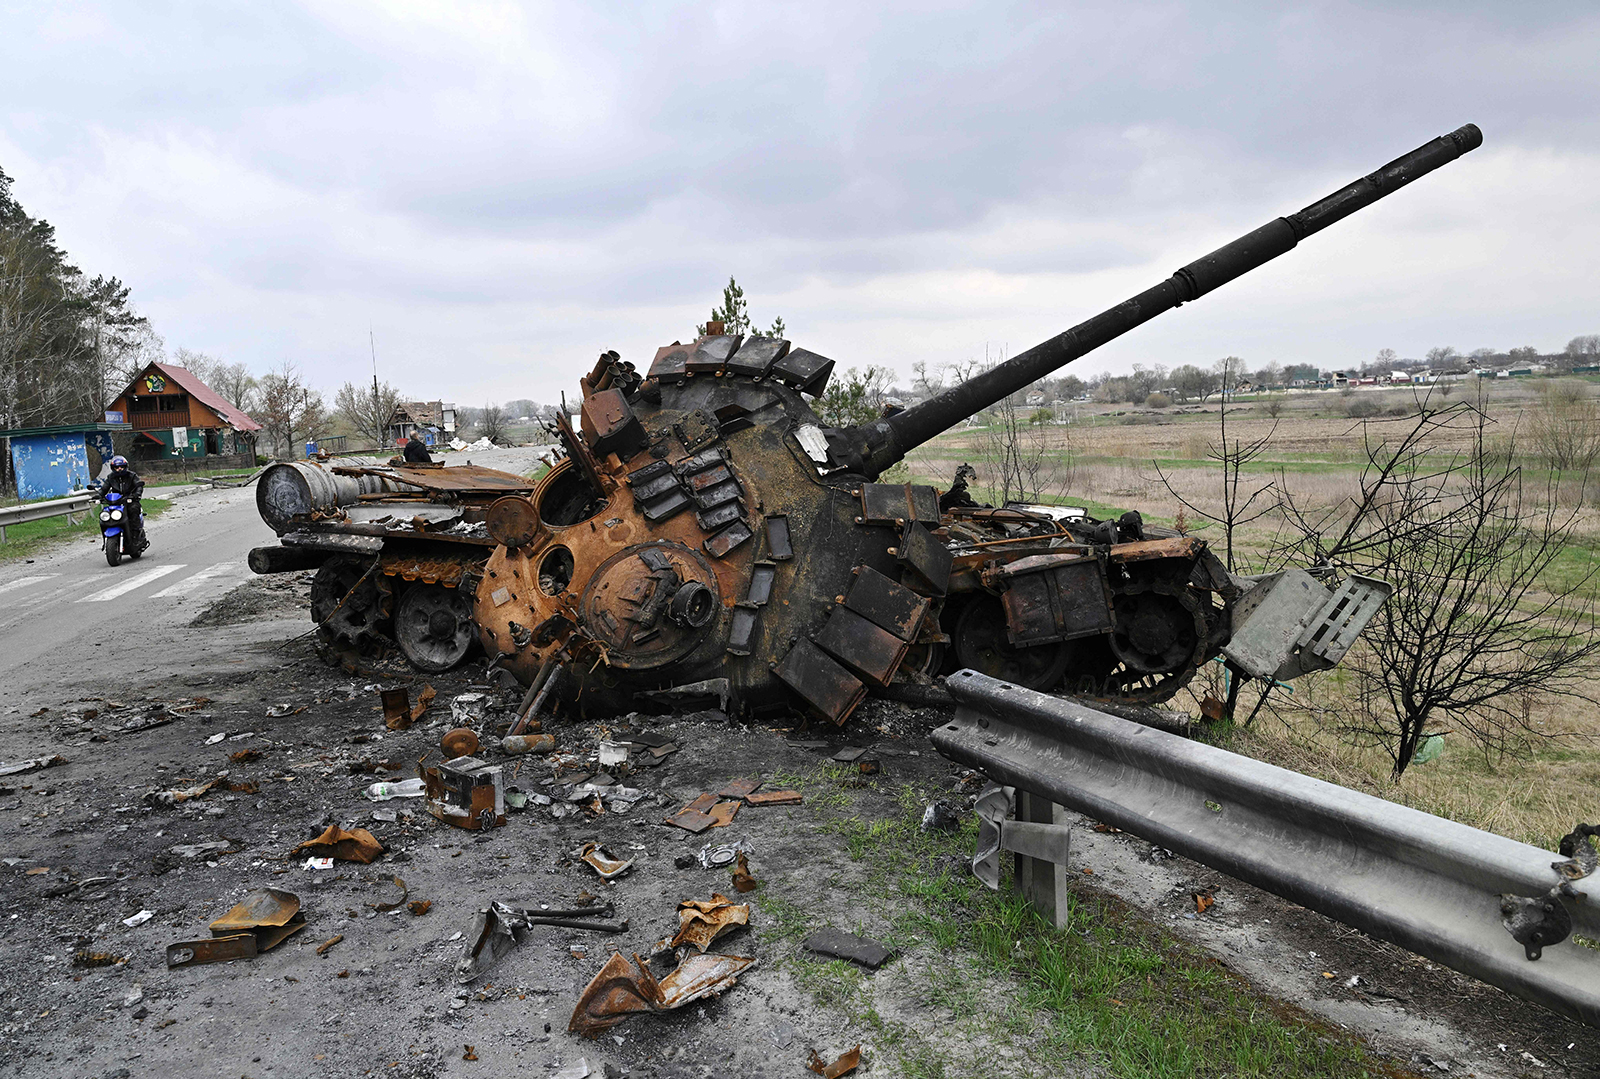 A man ride a motorbike past a destroyed Russian tank on a road in the Kyiv region on April 16.